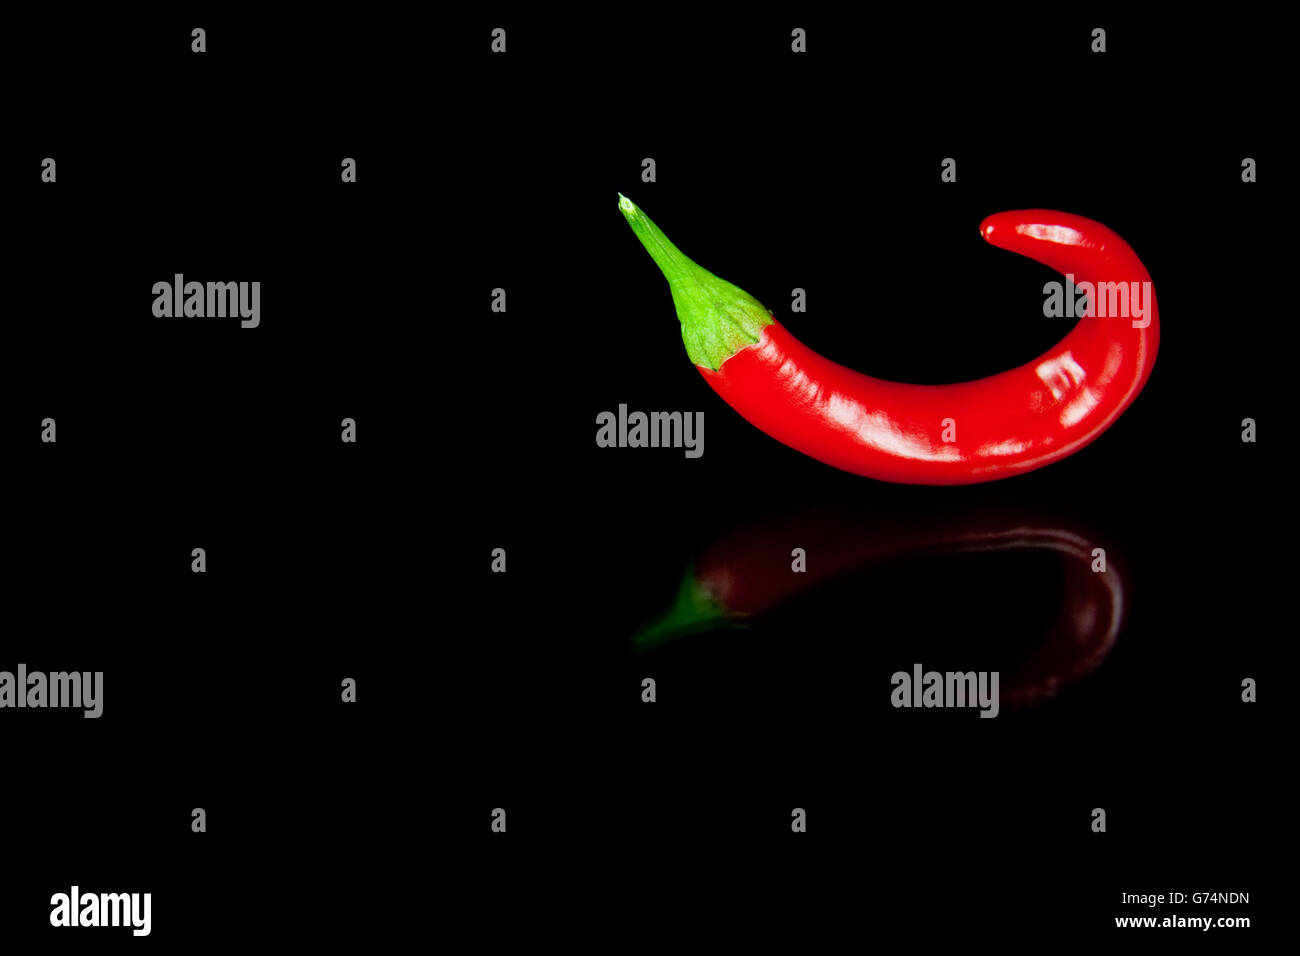 Red hot chili pepper Banque D'Images